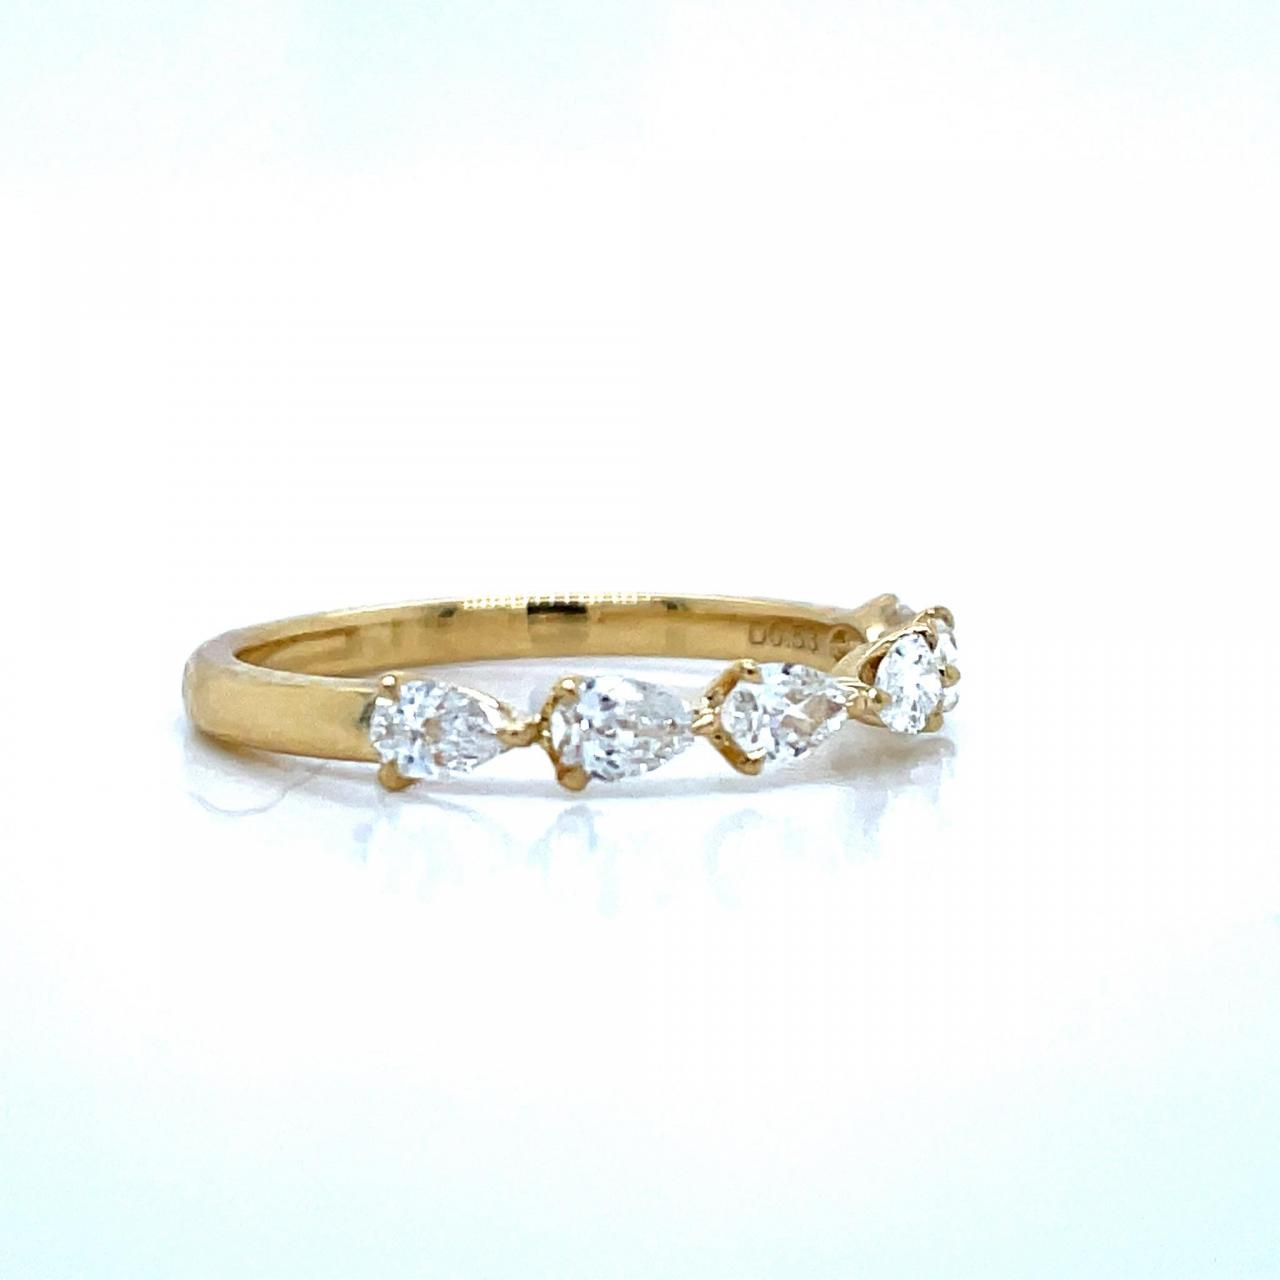 The Pixie Setting 18ct Yellow Gold Pear Cut Diamond Ring